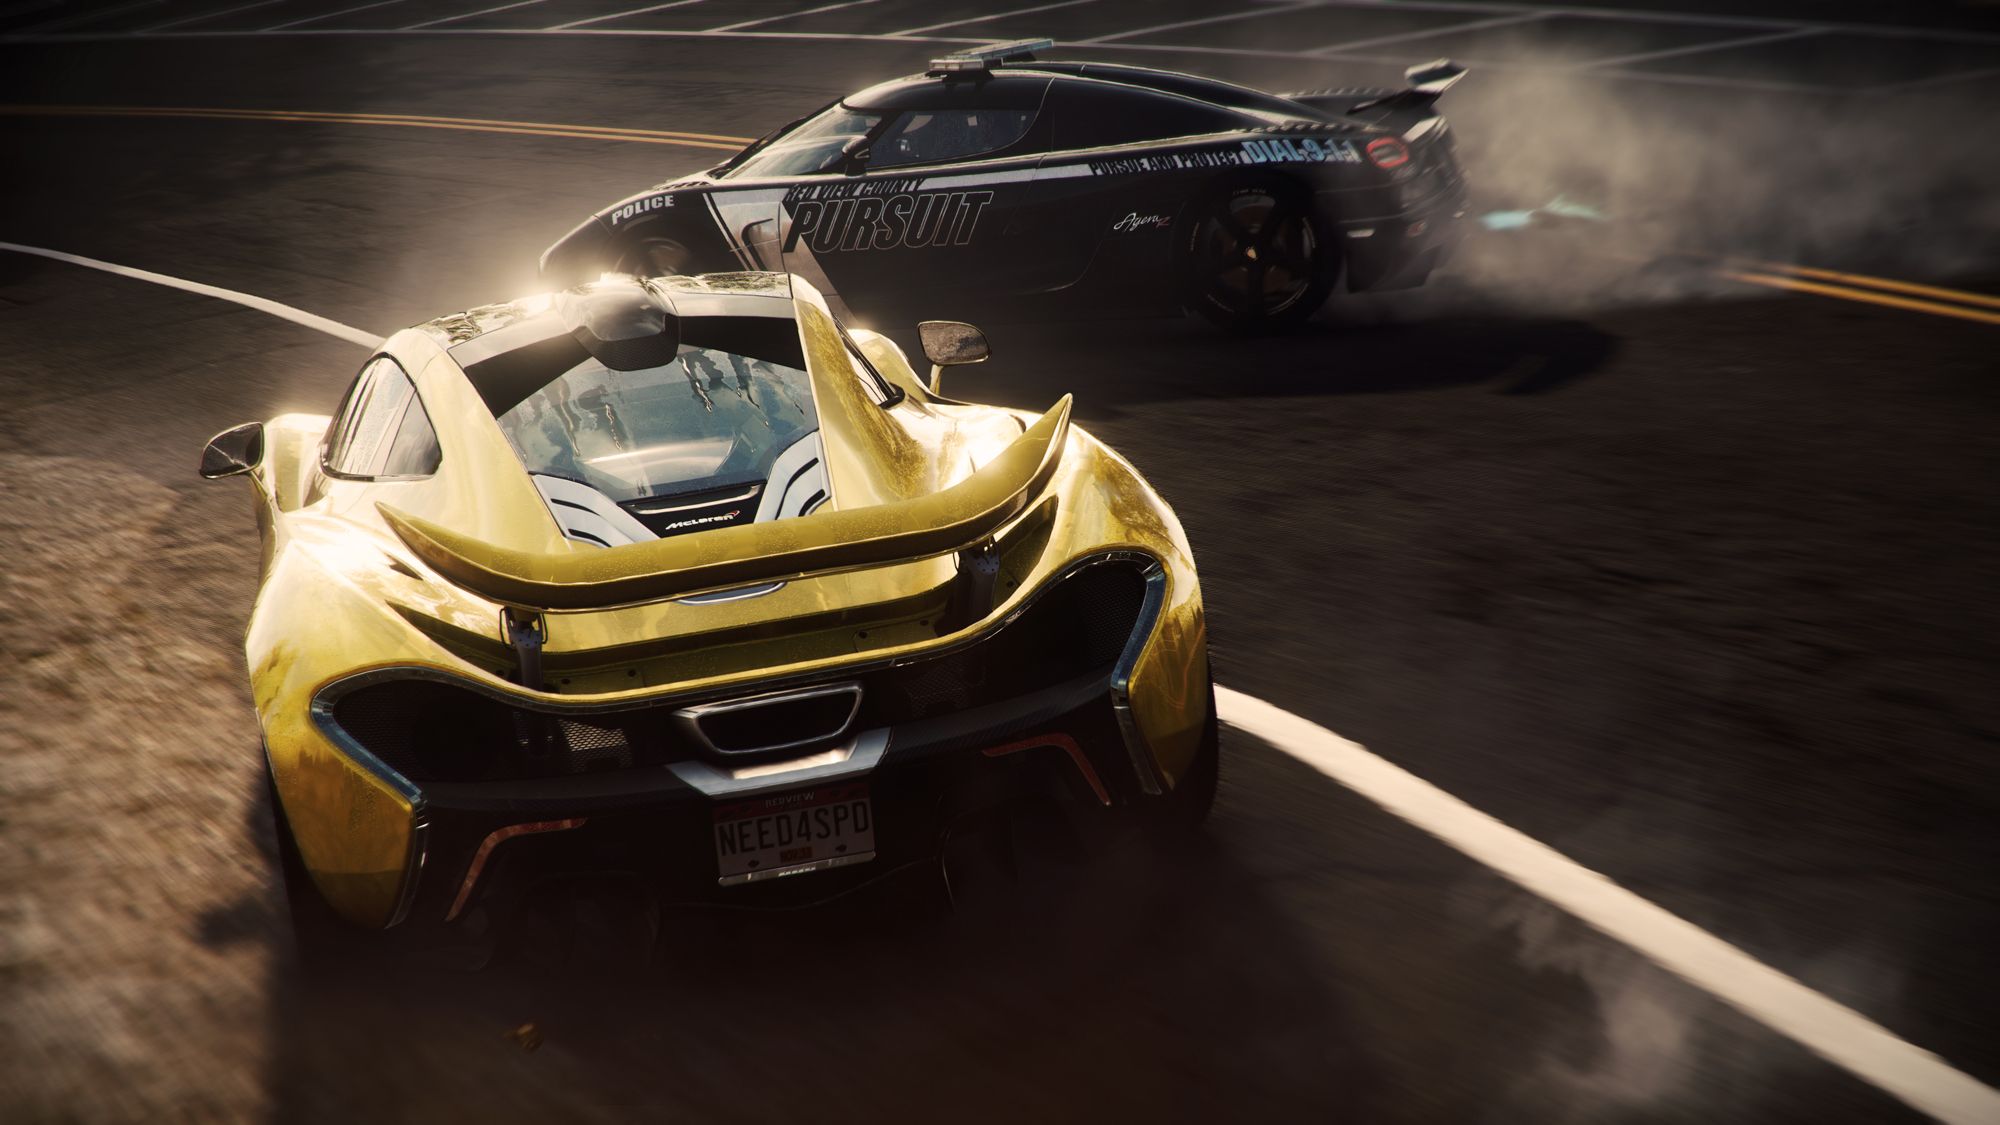 Need for Speed: Rivals announced for PS4 and Xbox One